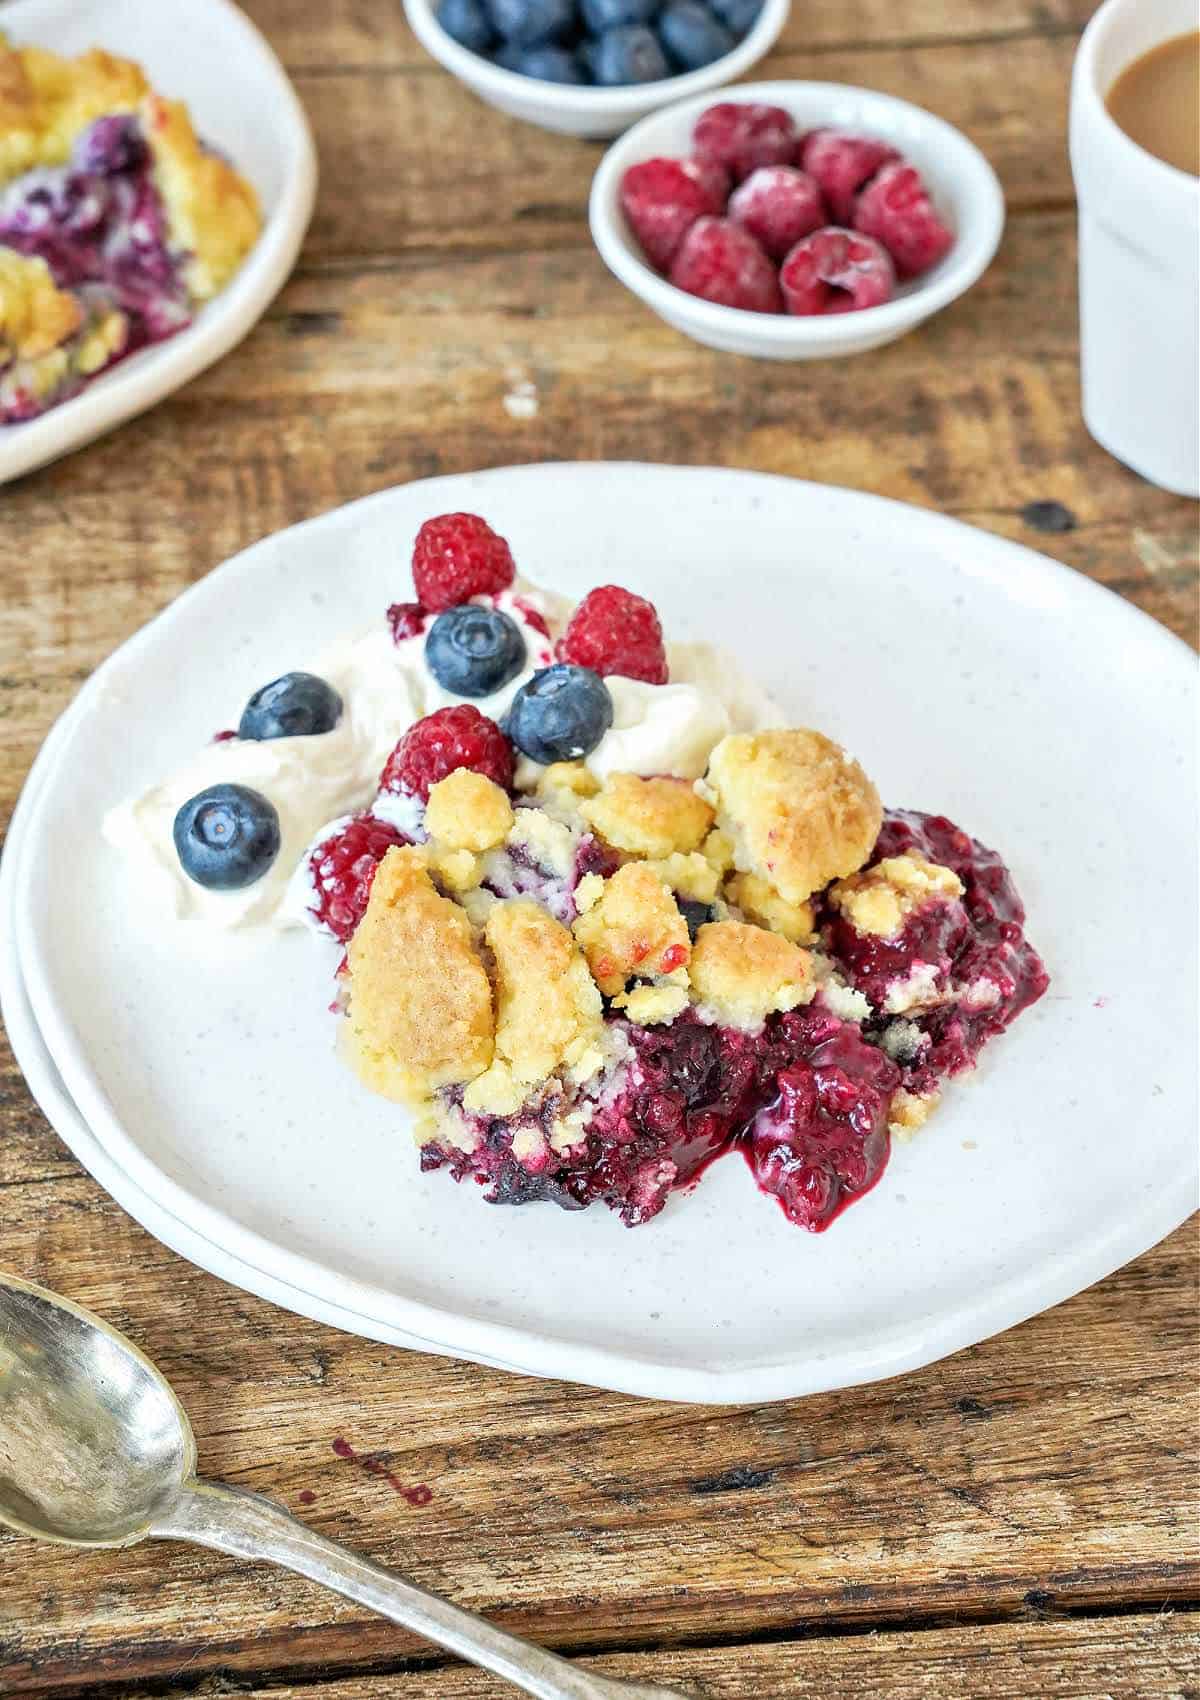 White plate with serving of mixed berry dump cake. Wooden table. Fruit in bowls.